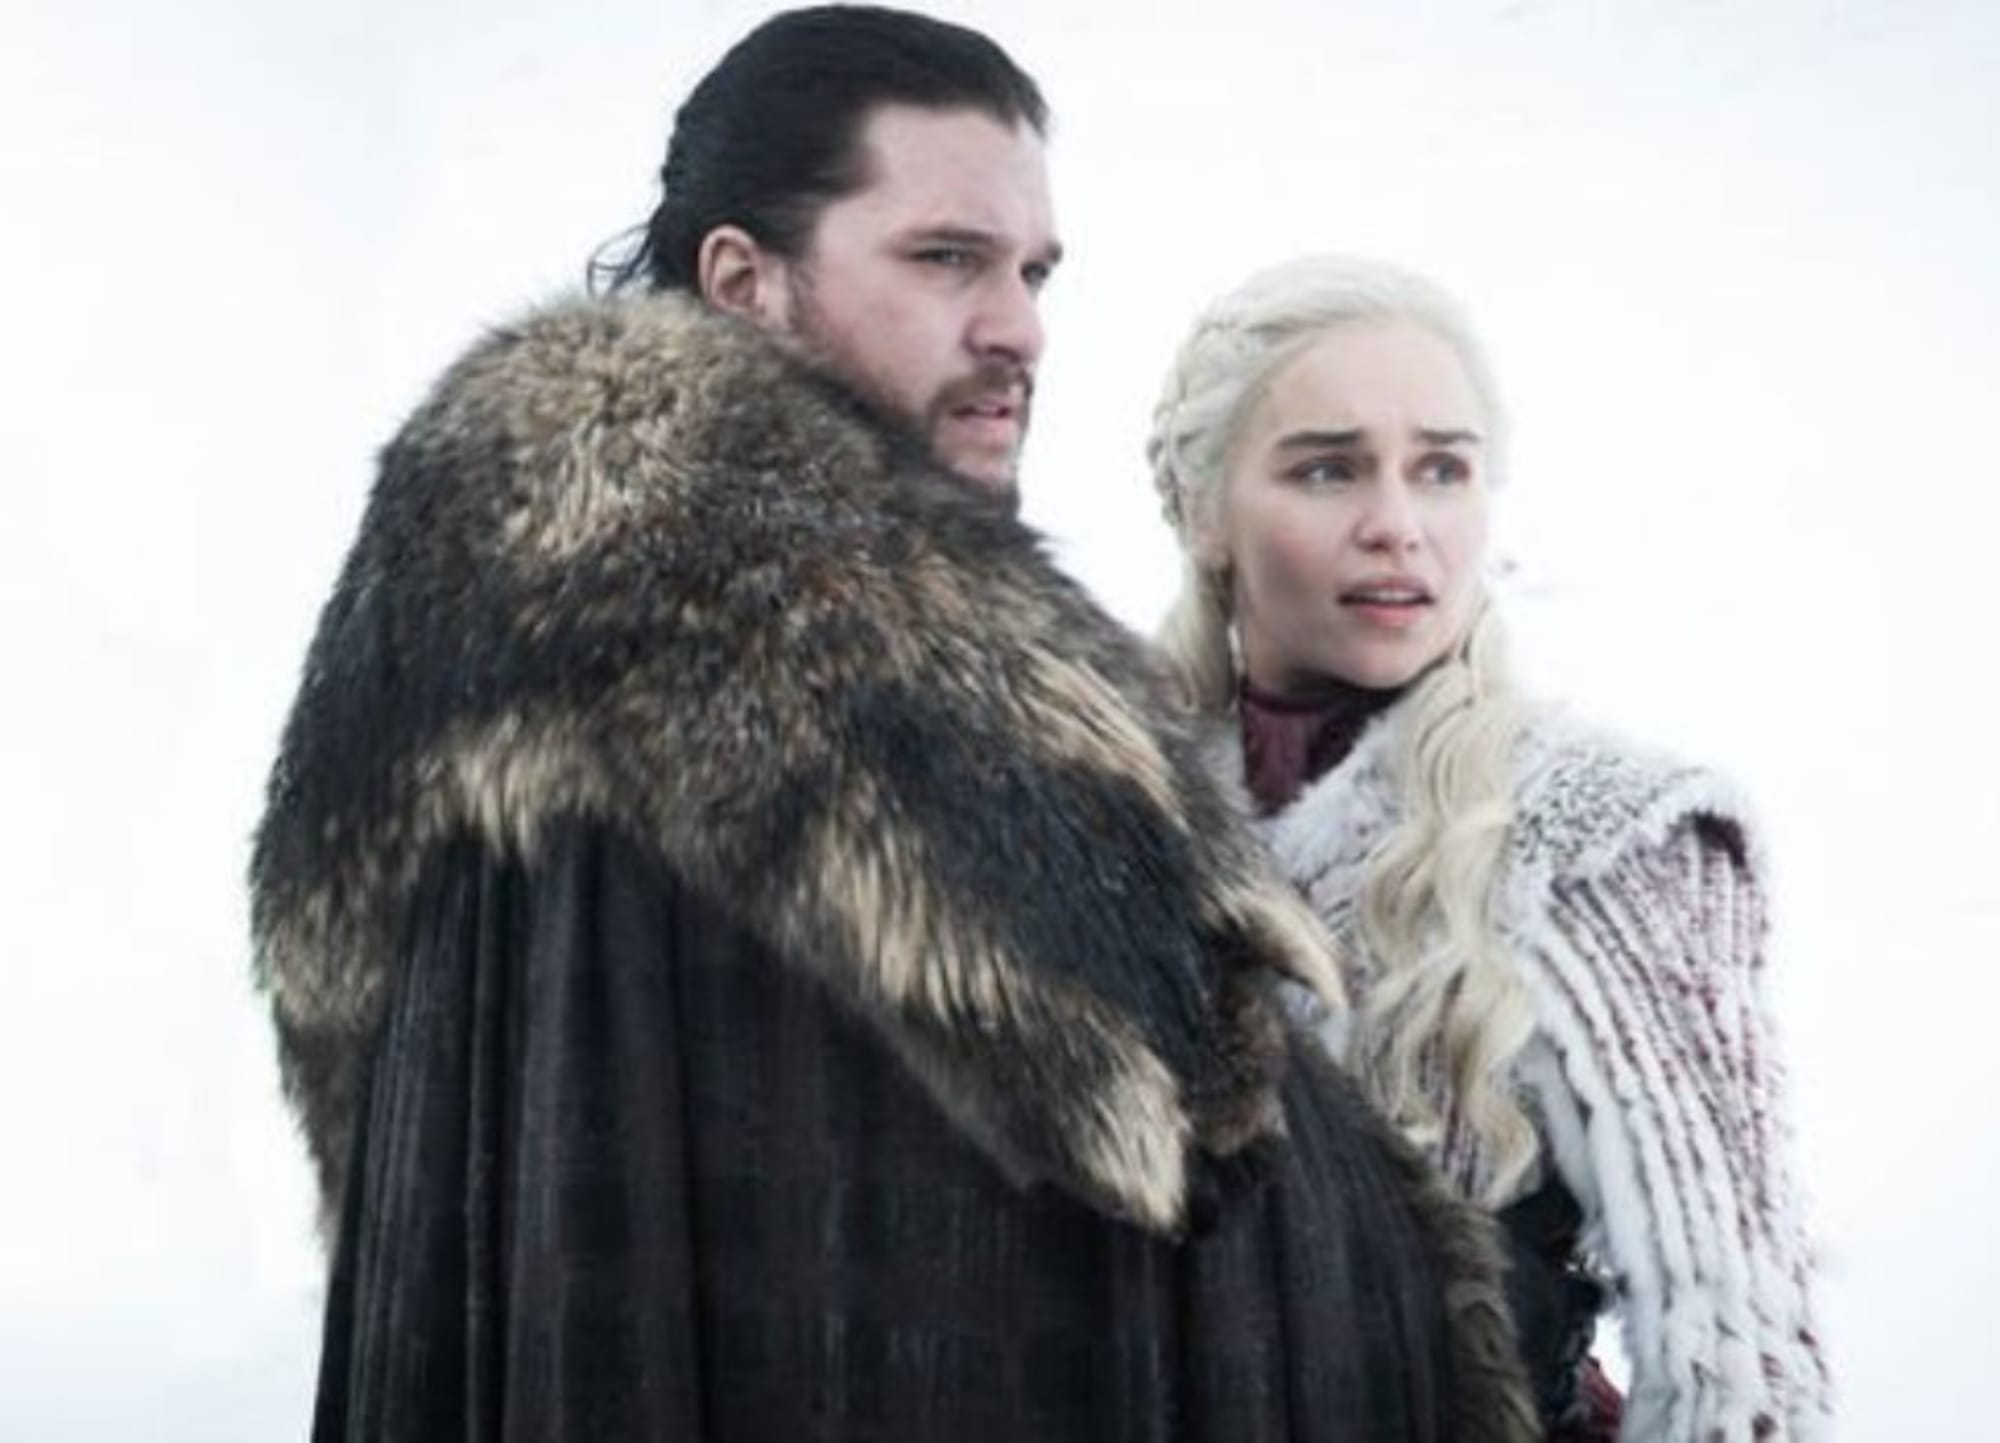 You can now watch the Game of Thrones Reunion Special on HBO Max